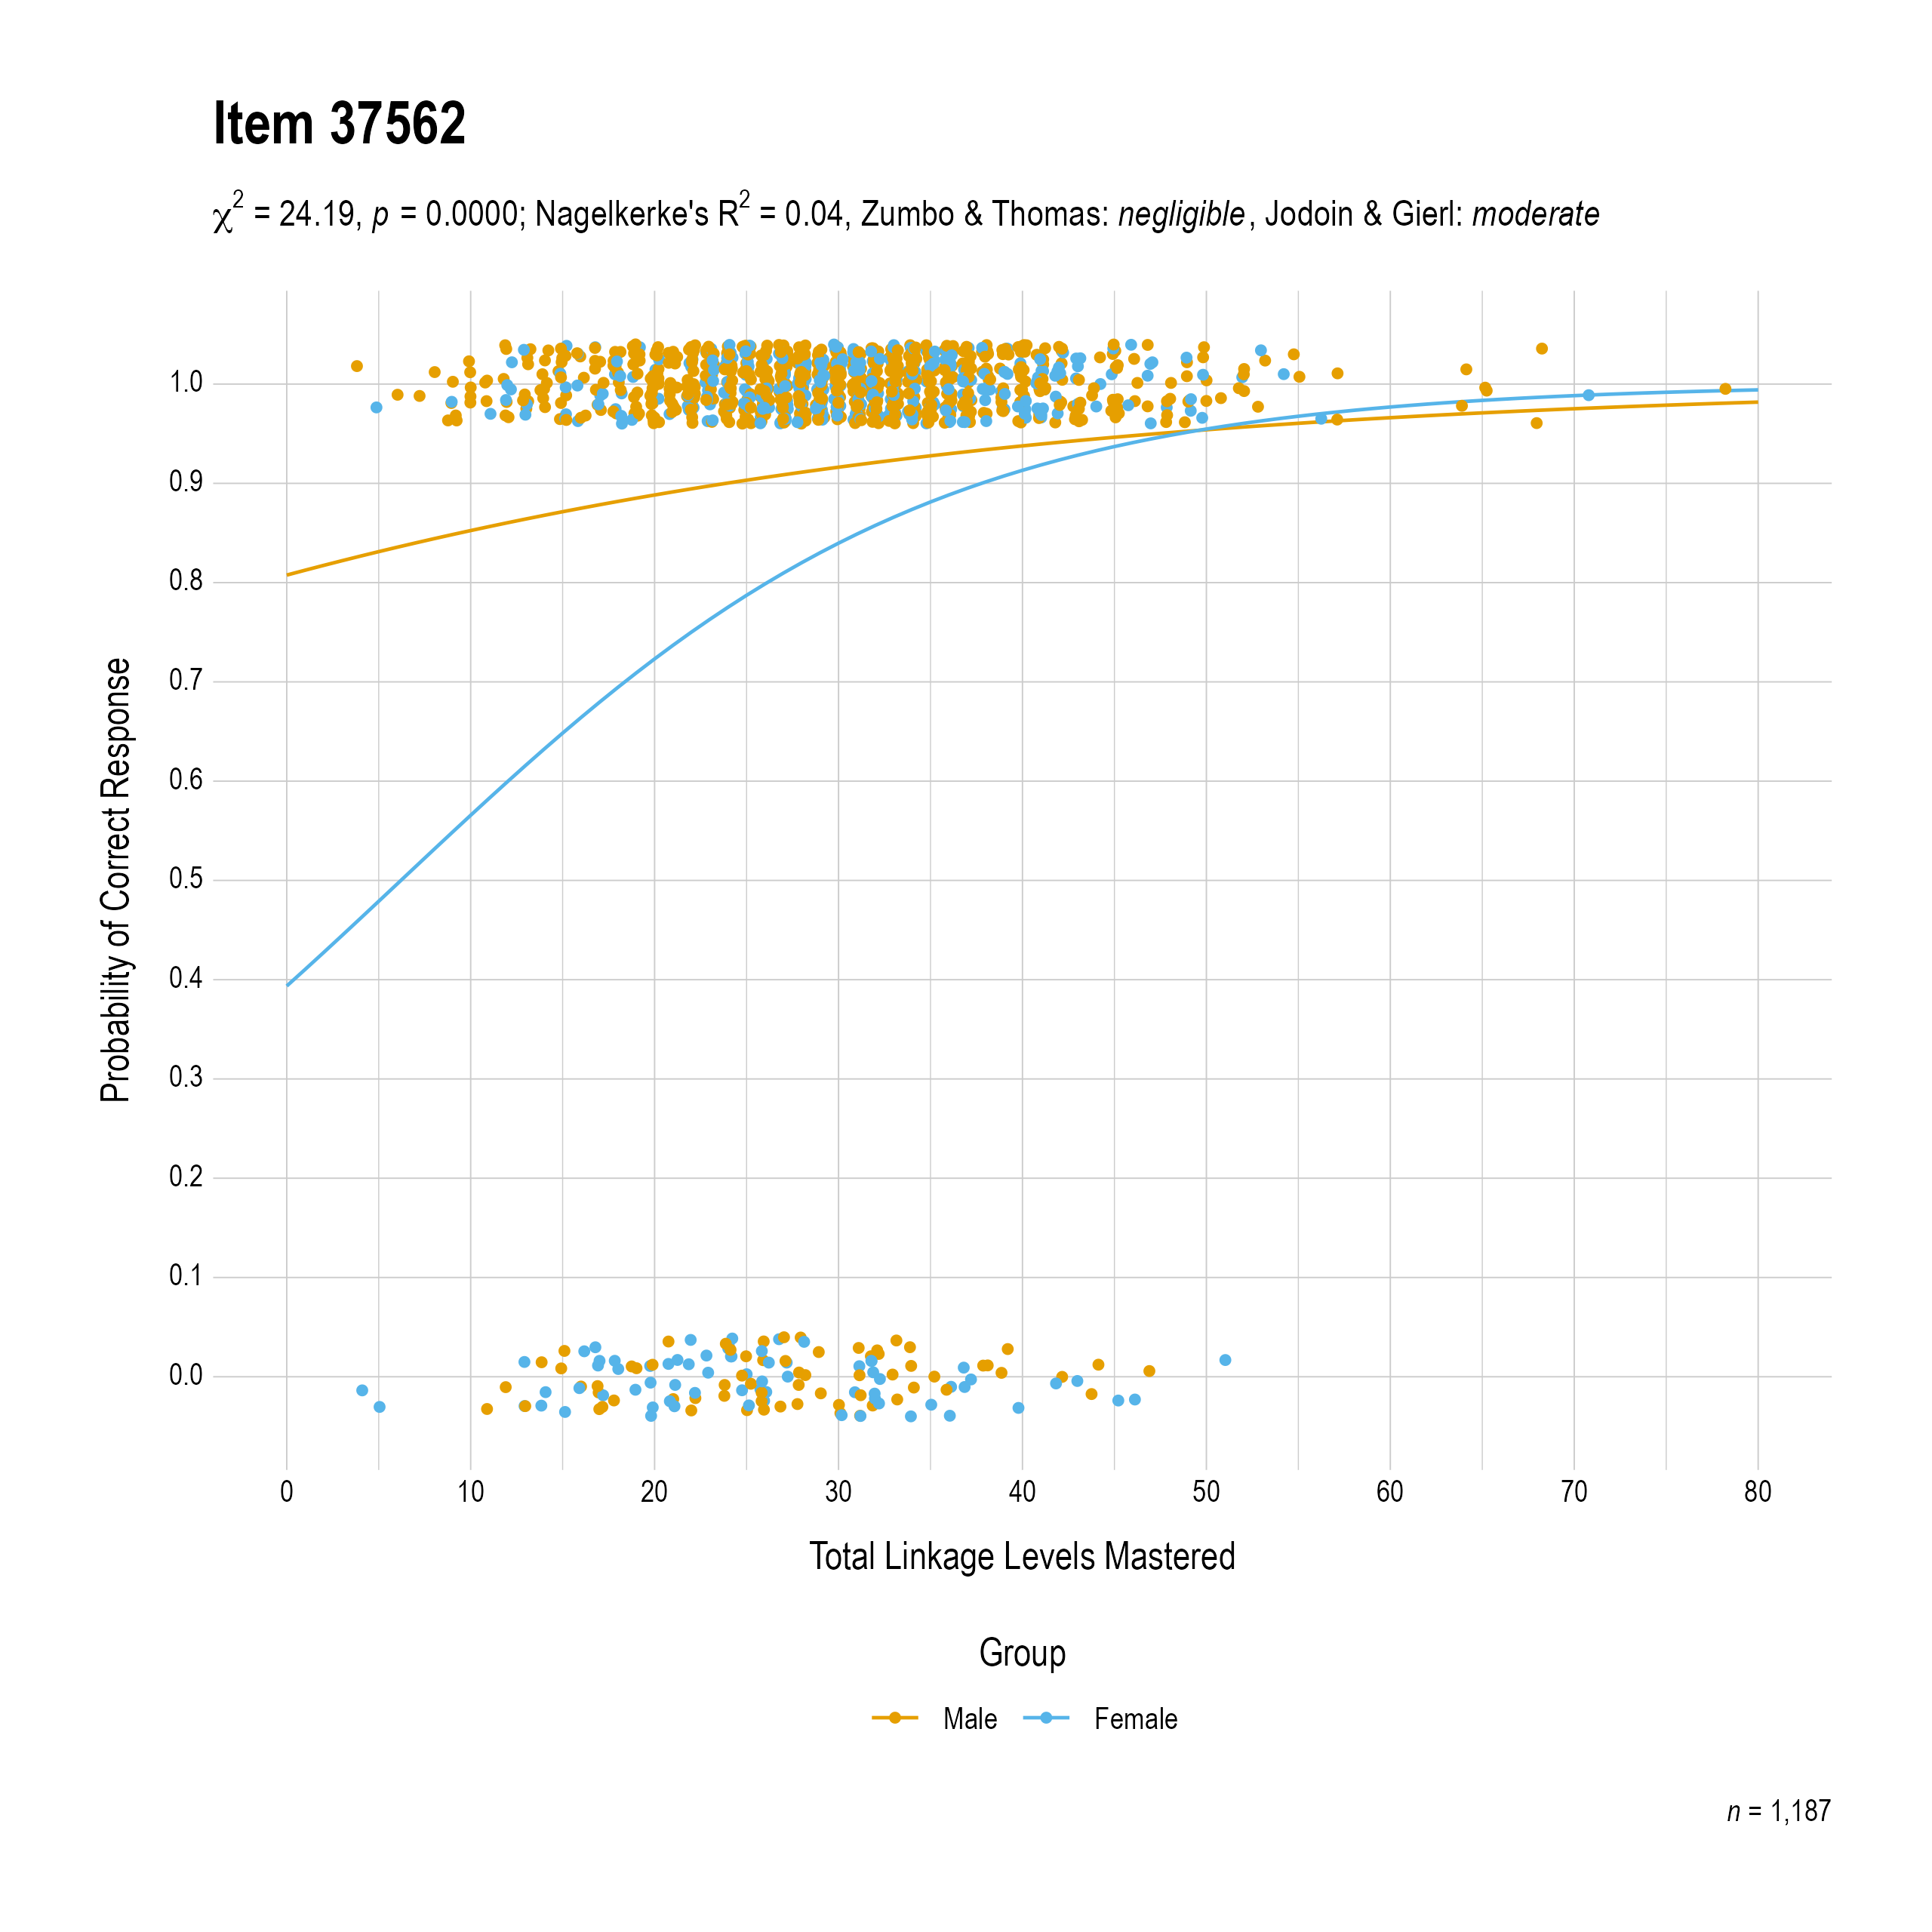 The plot of the combined gender differential item function evidence for English language arts item 37562. The figure contains points shaded by group. The figure also contains a logistic regression curve for each group. The total linkage levels mastered in is on the x-axis, and the probability of a correct response is on the y-axis.